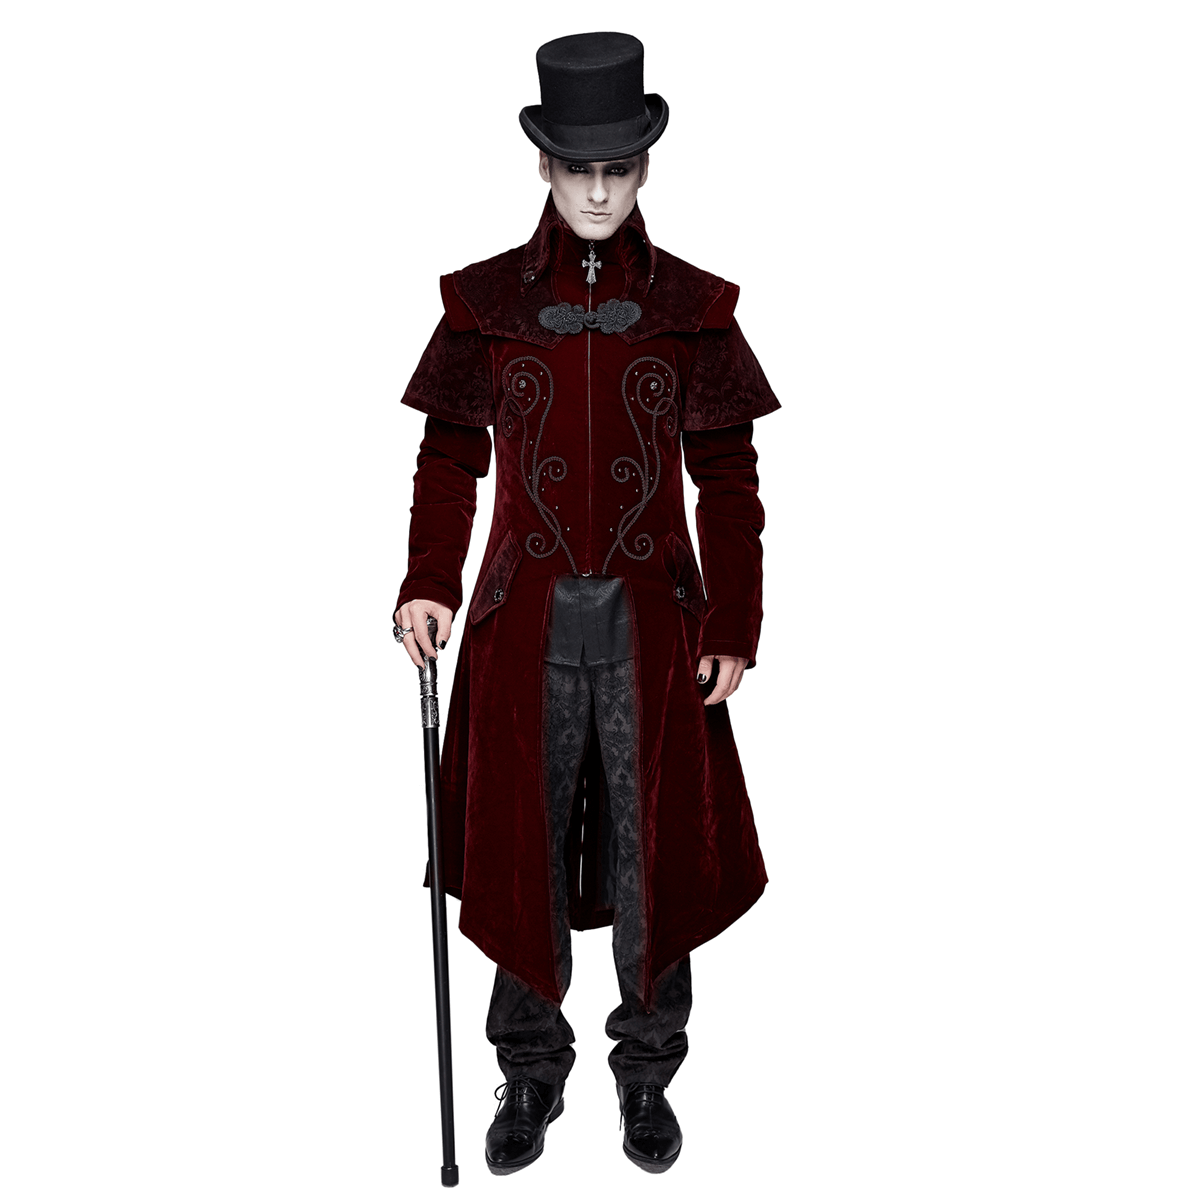 Vintage Men's Wine Red Long Velvet Coat / Gothic Coats with Zipper Front With Cross Accents - HARD'N'HEAVY